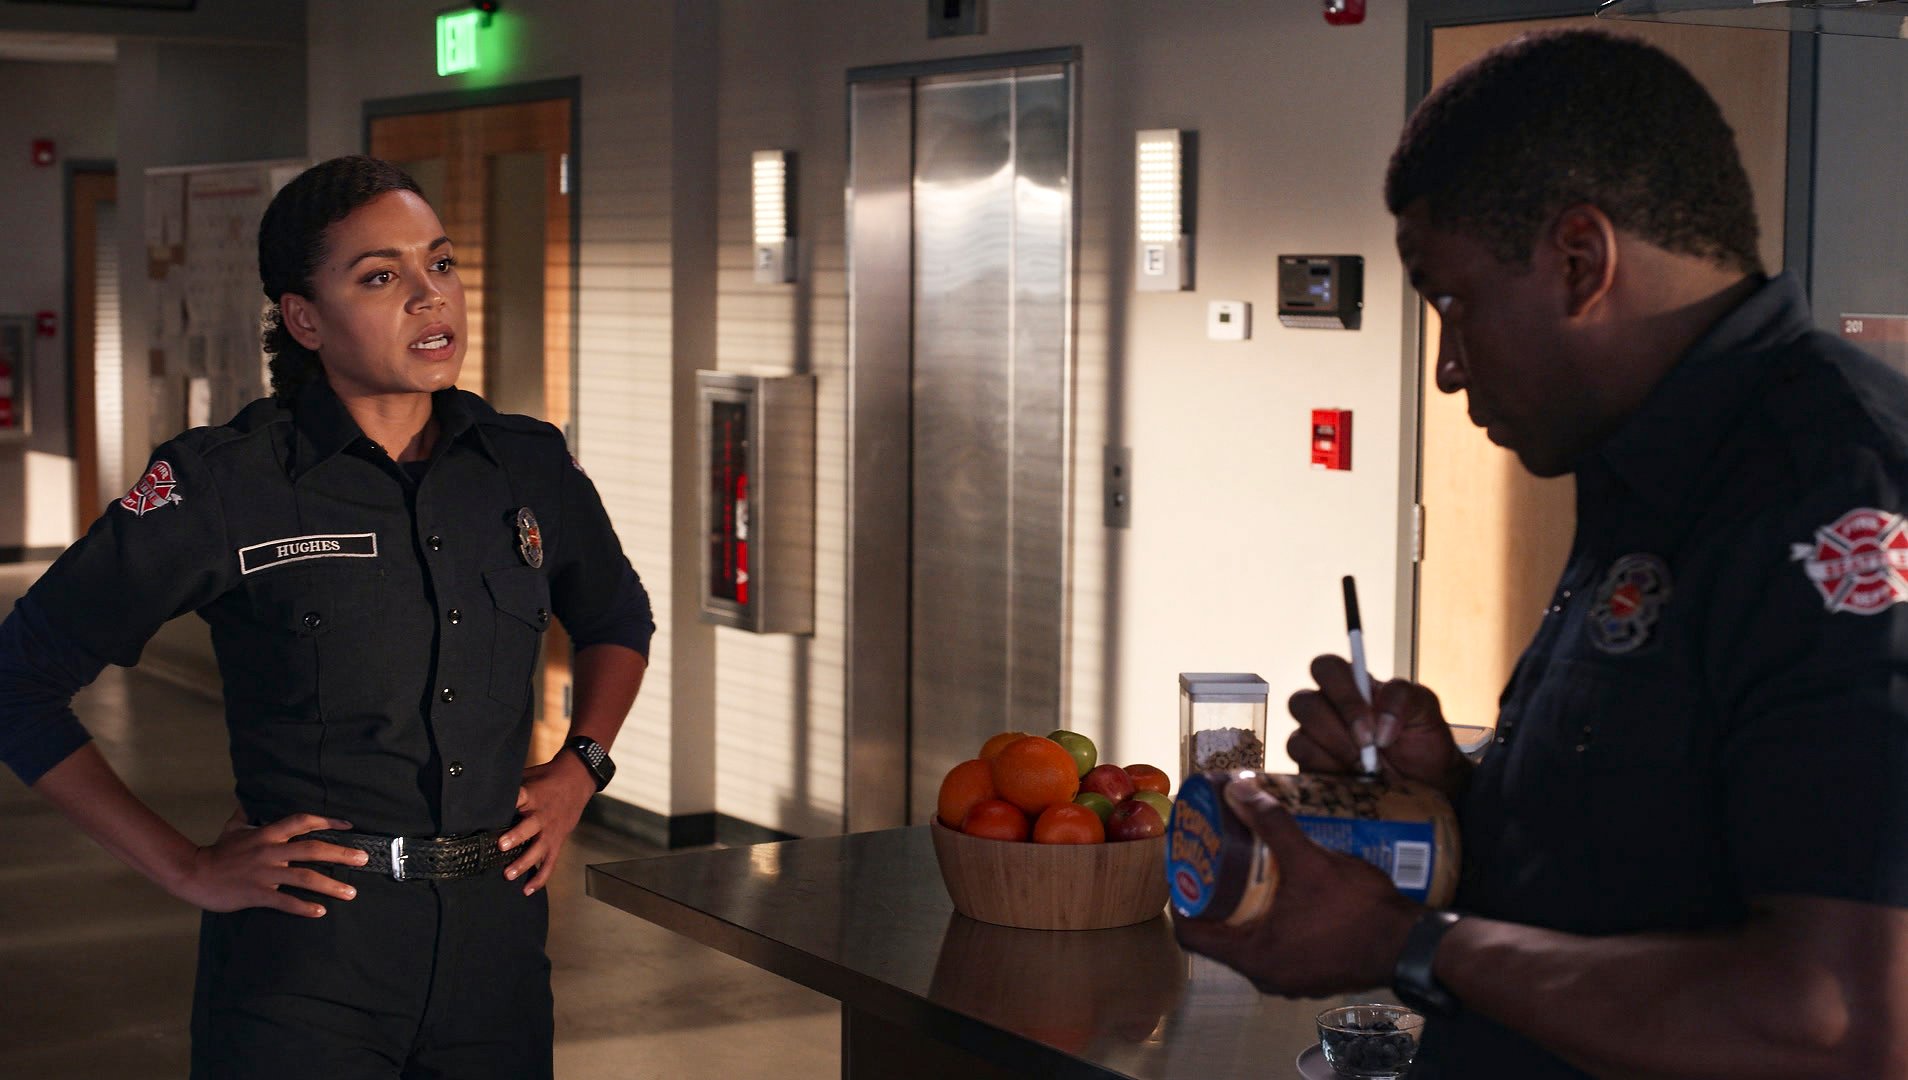 Barrett Doss as Victoria ‘Vic’ Hughes and Okieriete 'Oak' Onaodowan as Dean Miller share a conversation together in ‘Station 19’ Season 5 Episode 5, the ‘Grey’s Anatomy’ Season 18 crossover